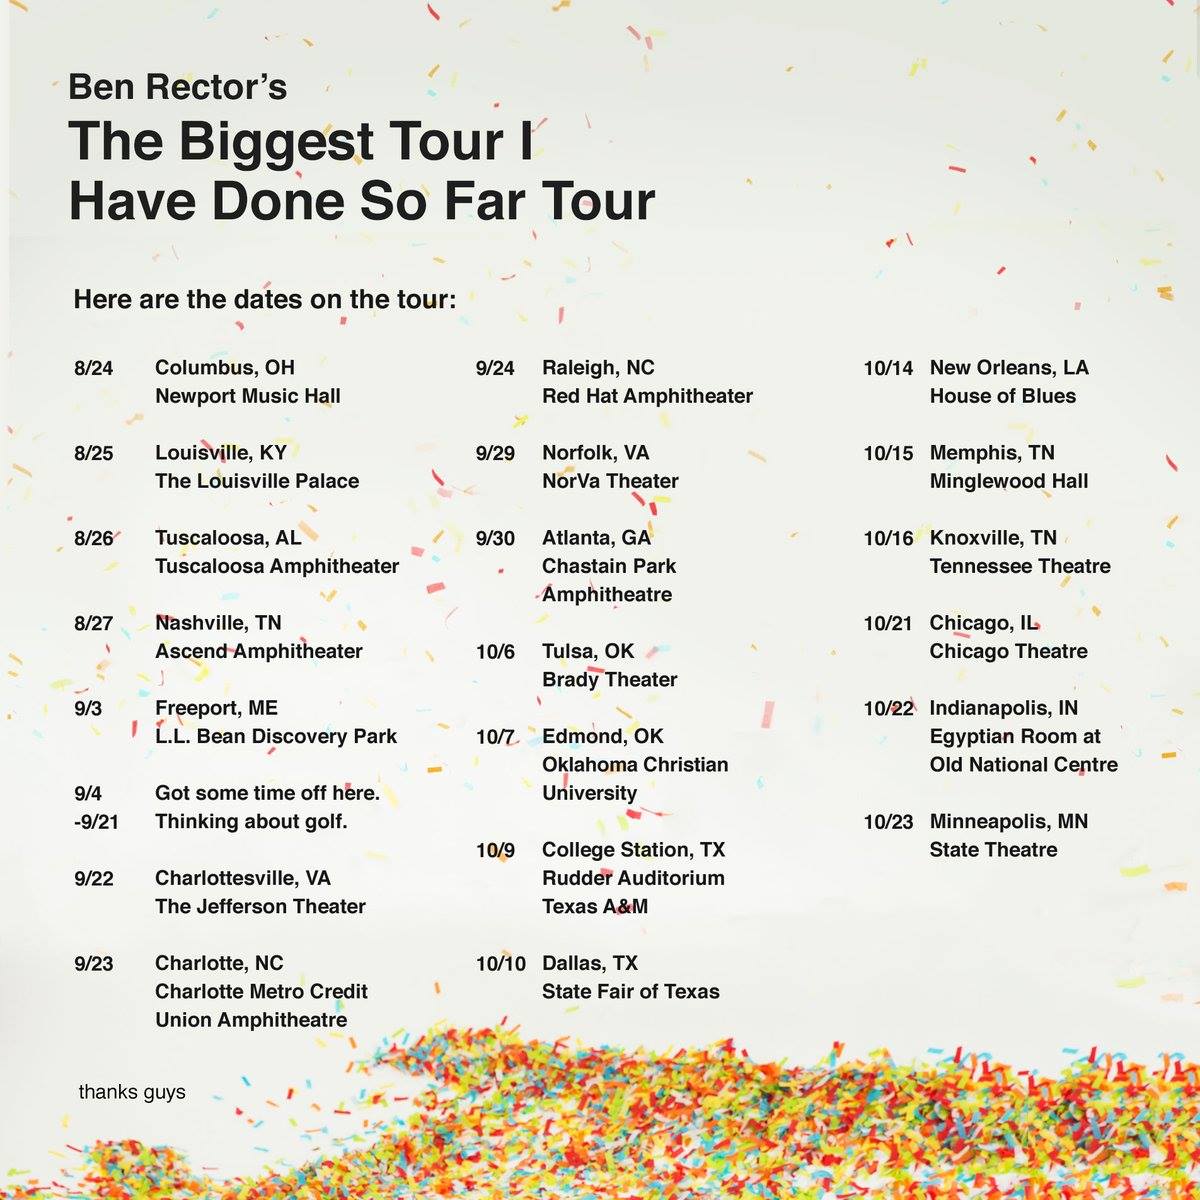 Ben Rector - U.S. The Biggest Tour I Have Done So Far Tour - 2016 Tour Poster